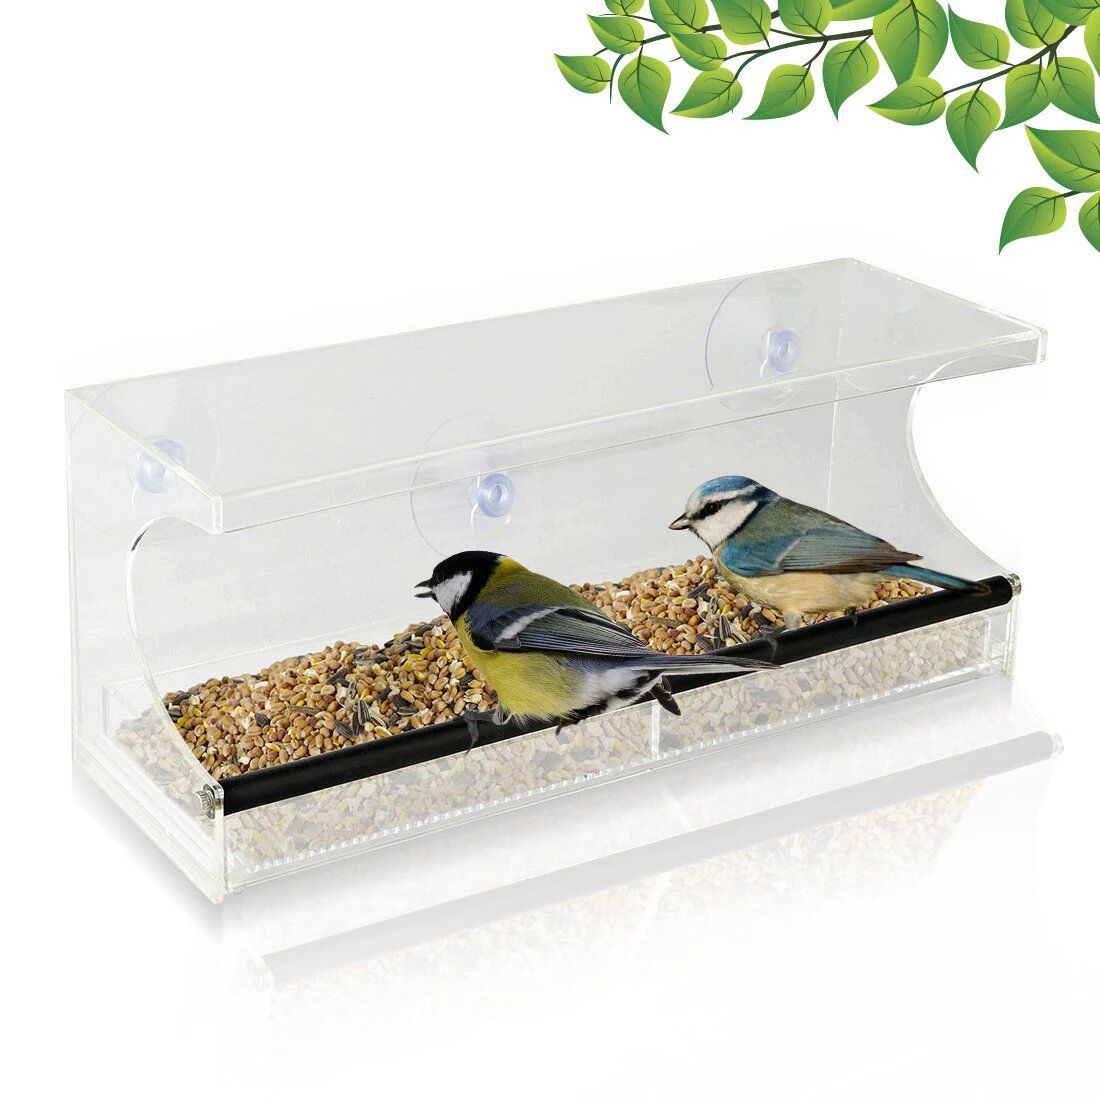 DailySale Window Bird Feeder- See-Through Acrylic - Clear, Removable Slide Out Tray